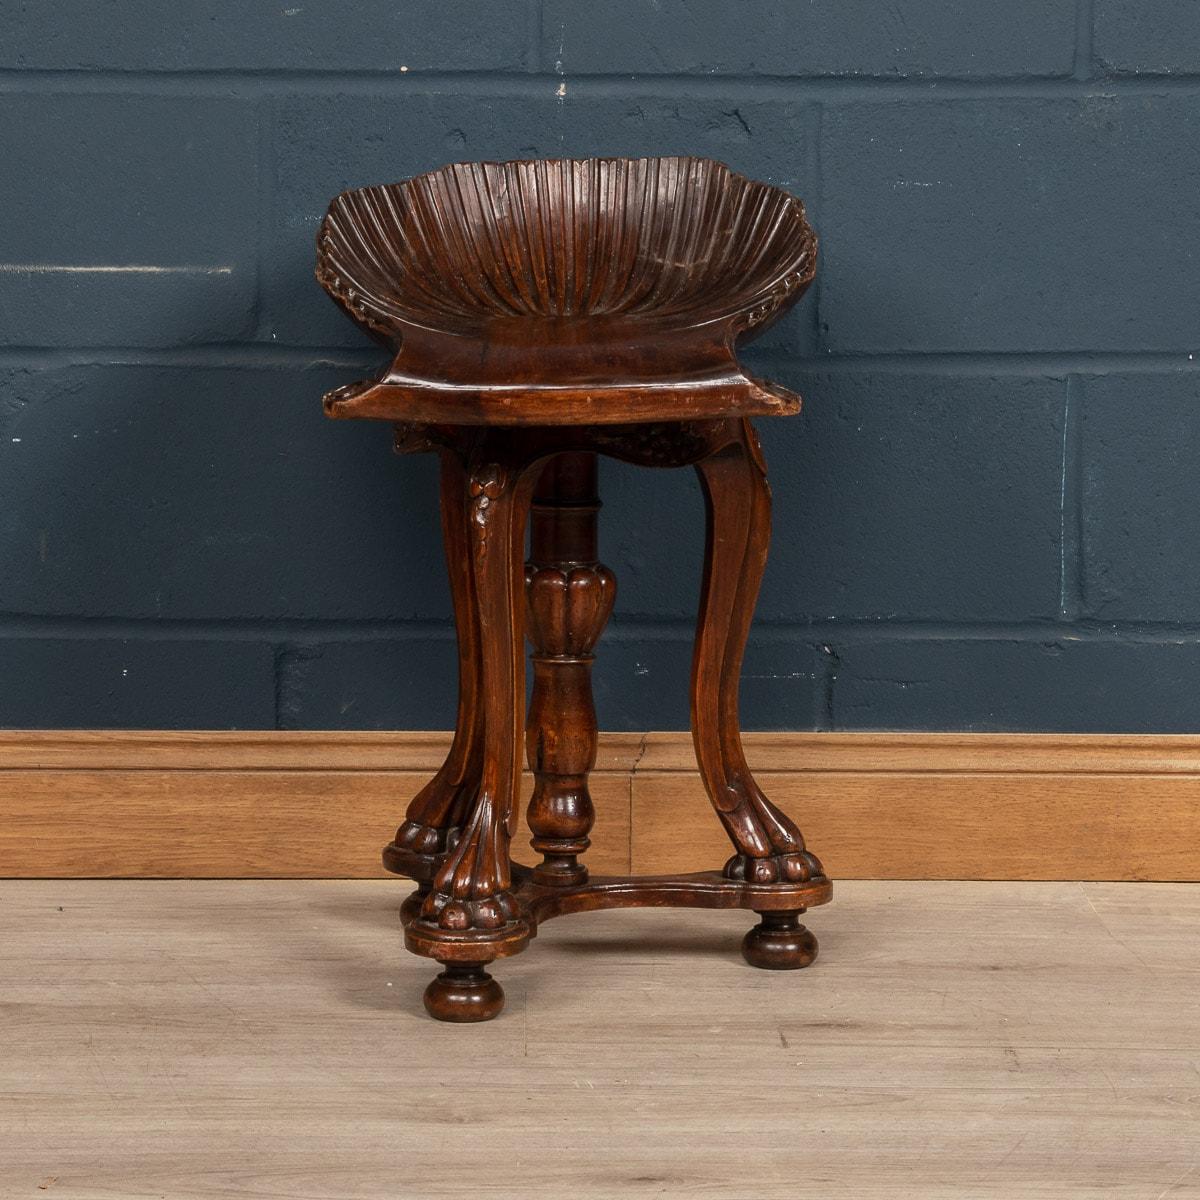 A beautiful carved antique fruitwood grotto stool, the bench standing on cabriole legs joined with a bottom stretcher, and bun feet reminiscent of animal paws, made in Venice around the turn of the 19th century. The seat has a 